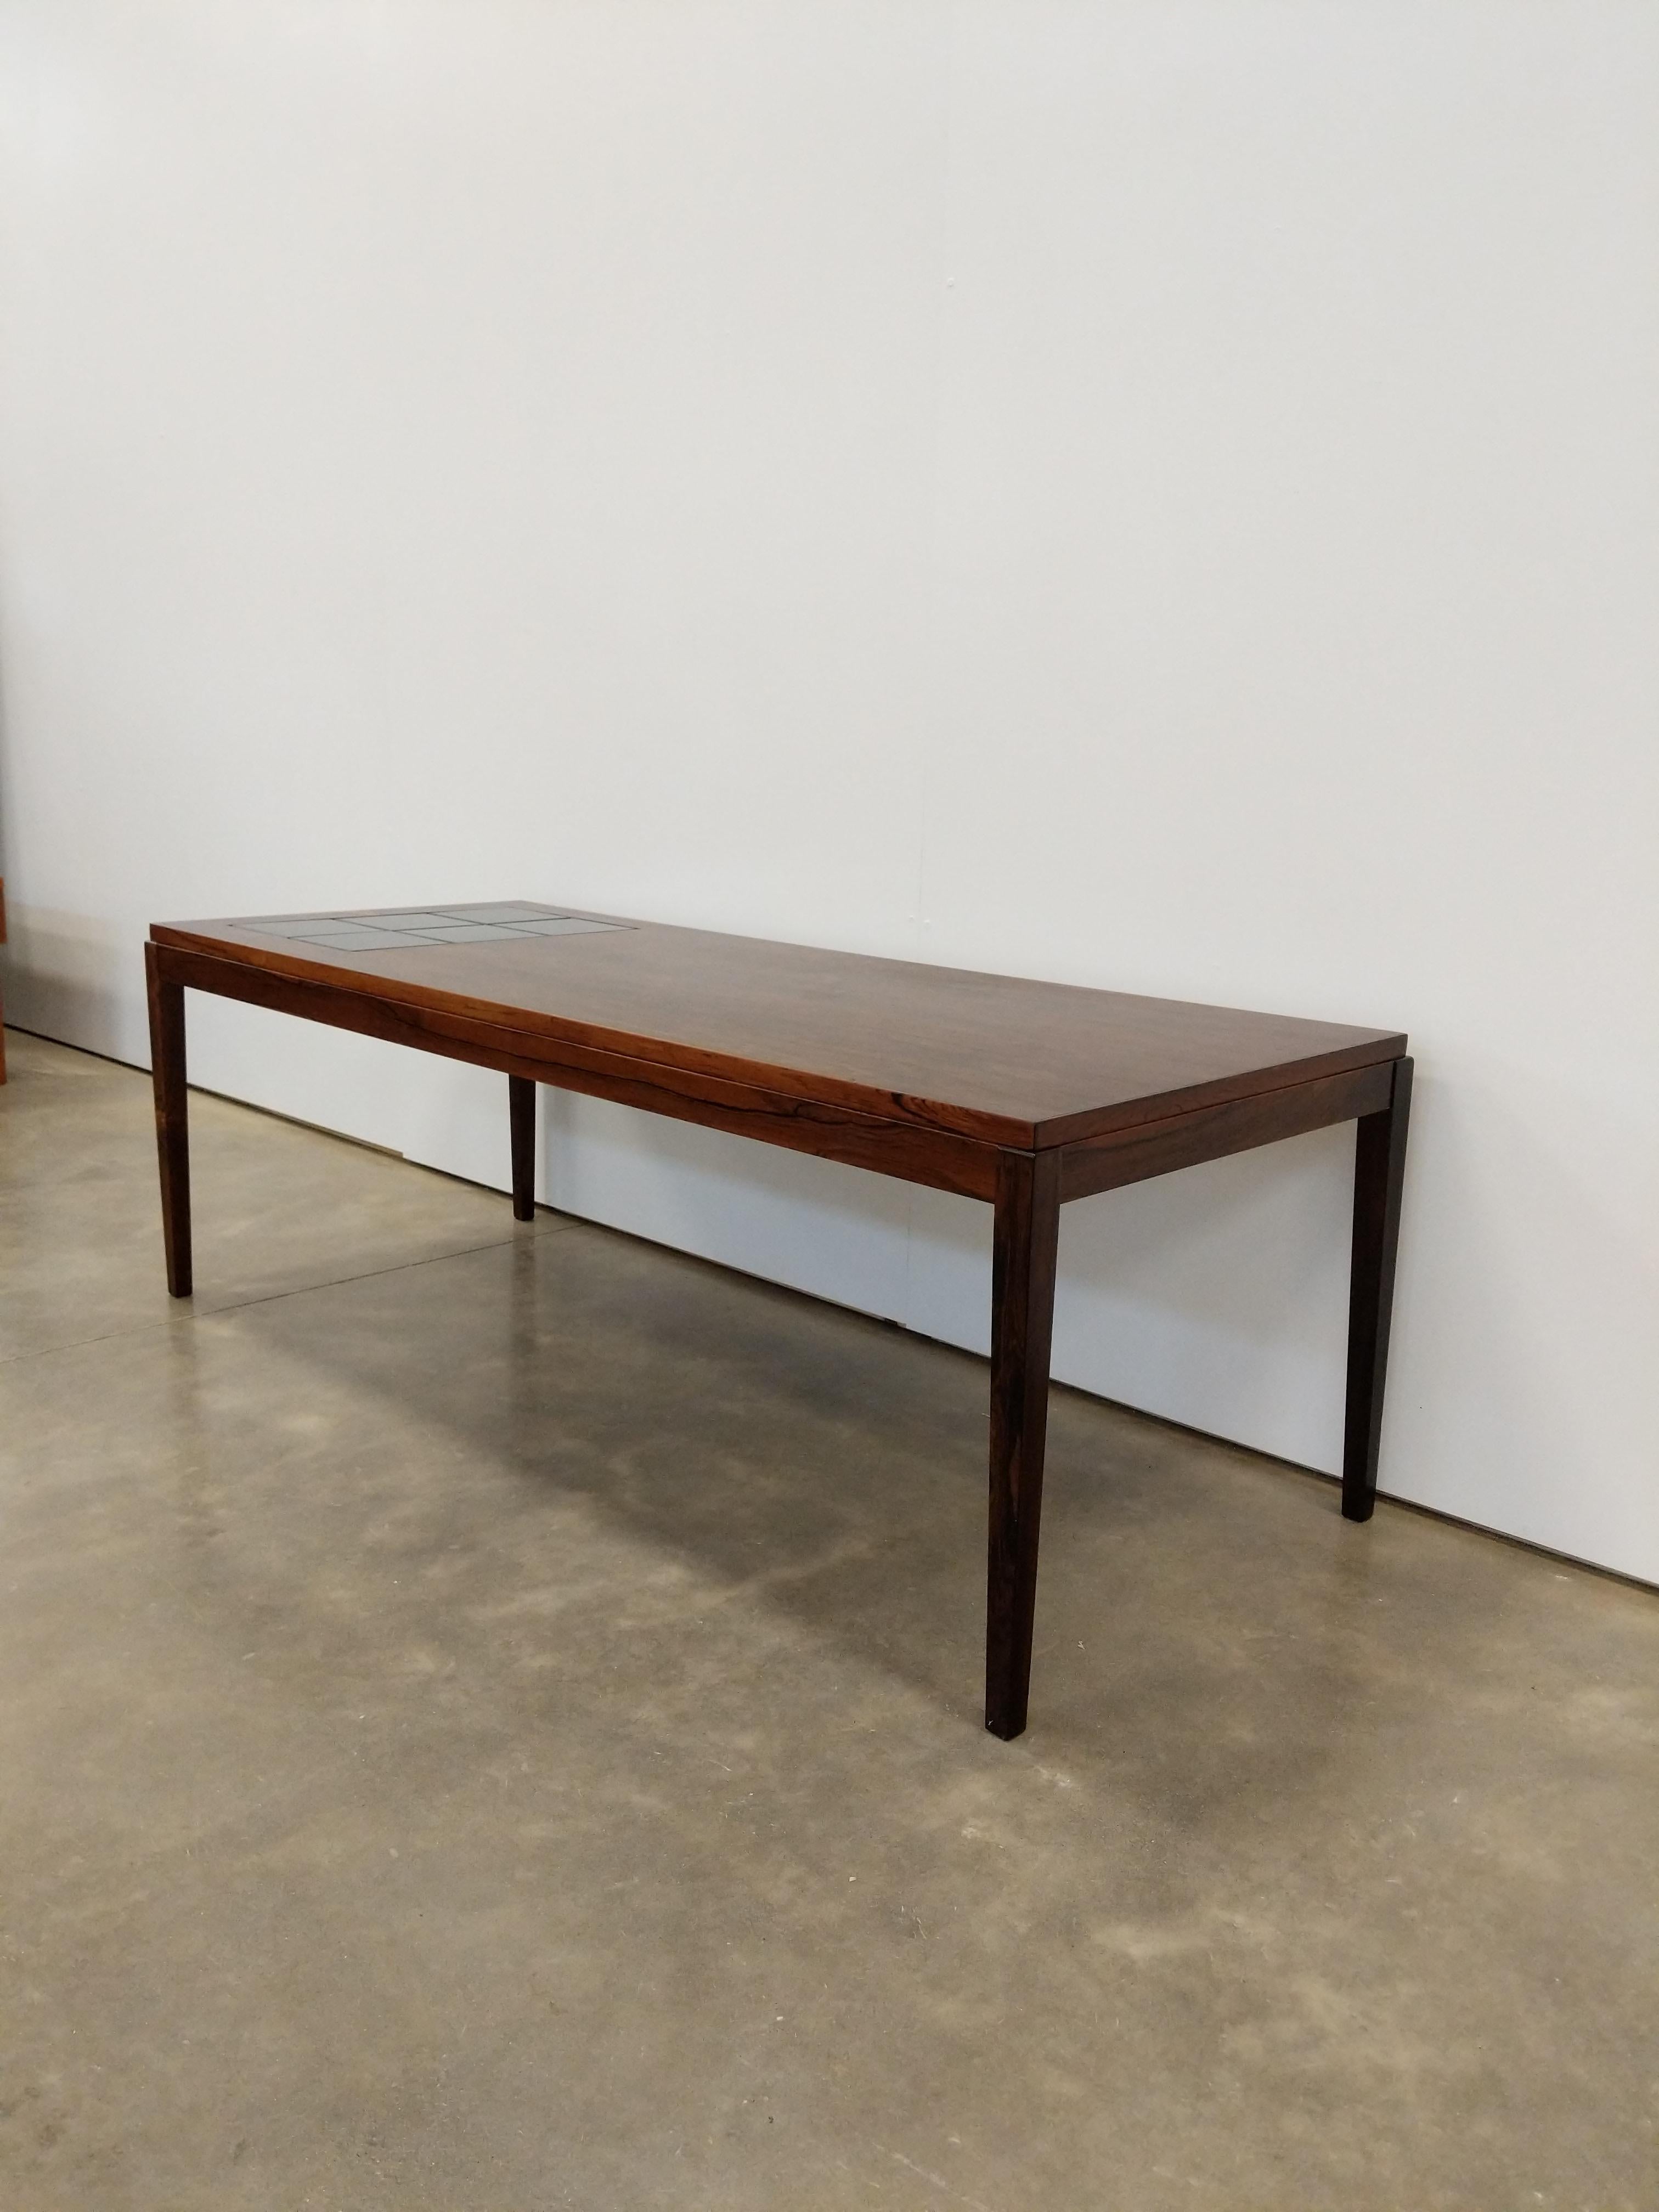 Authentic vintage mid century Danish / Scandinavian Modern teak coffee table.

This piece is in excellent vintage condition with few signs of age-related wear (see photos).

If you would like any additional details, please contact